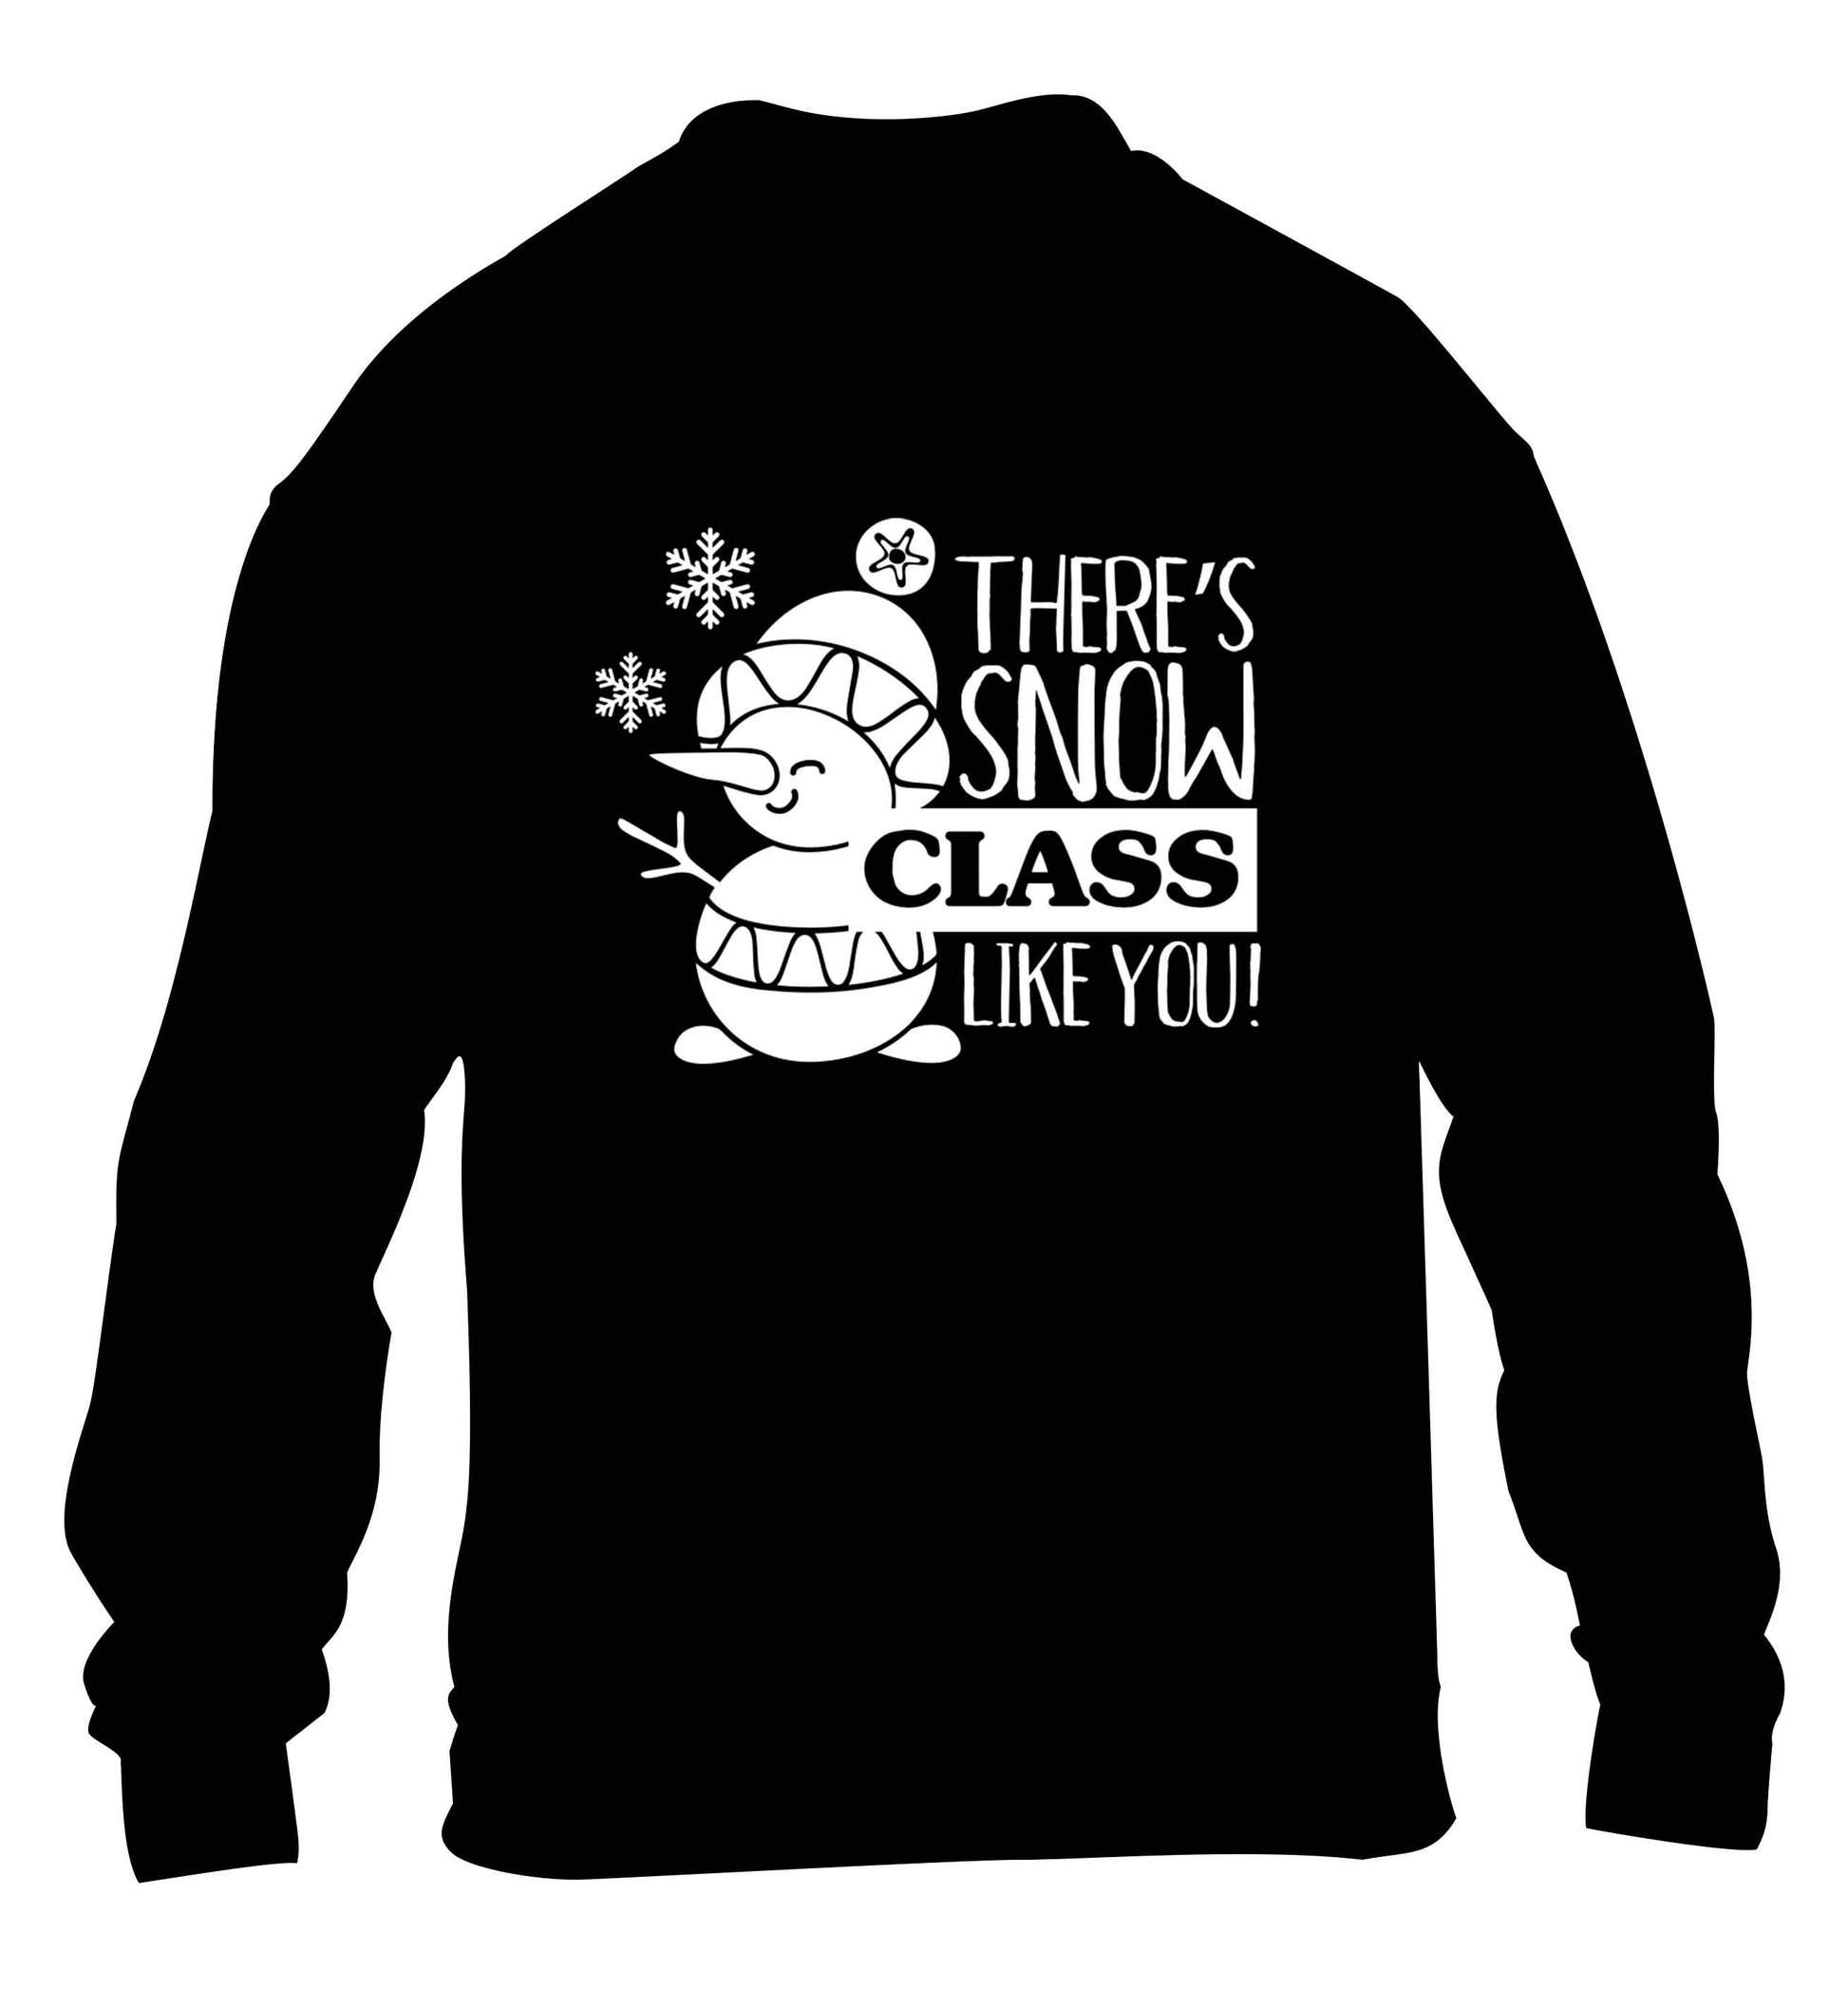 There's snow class like you children's black sweater 12-13 Years